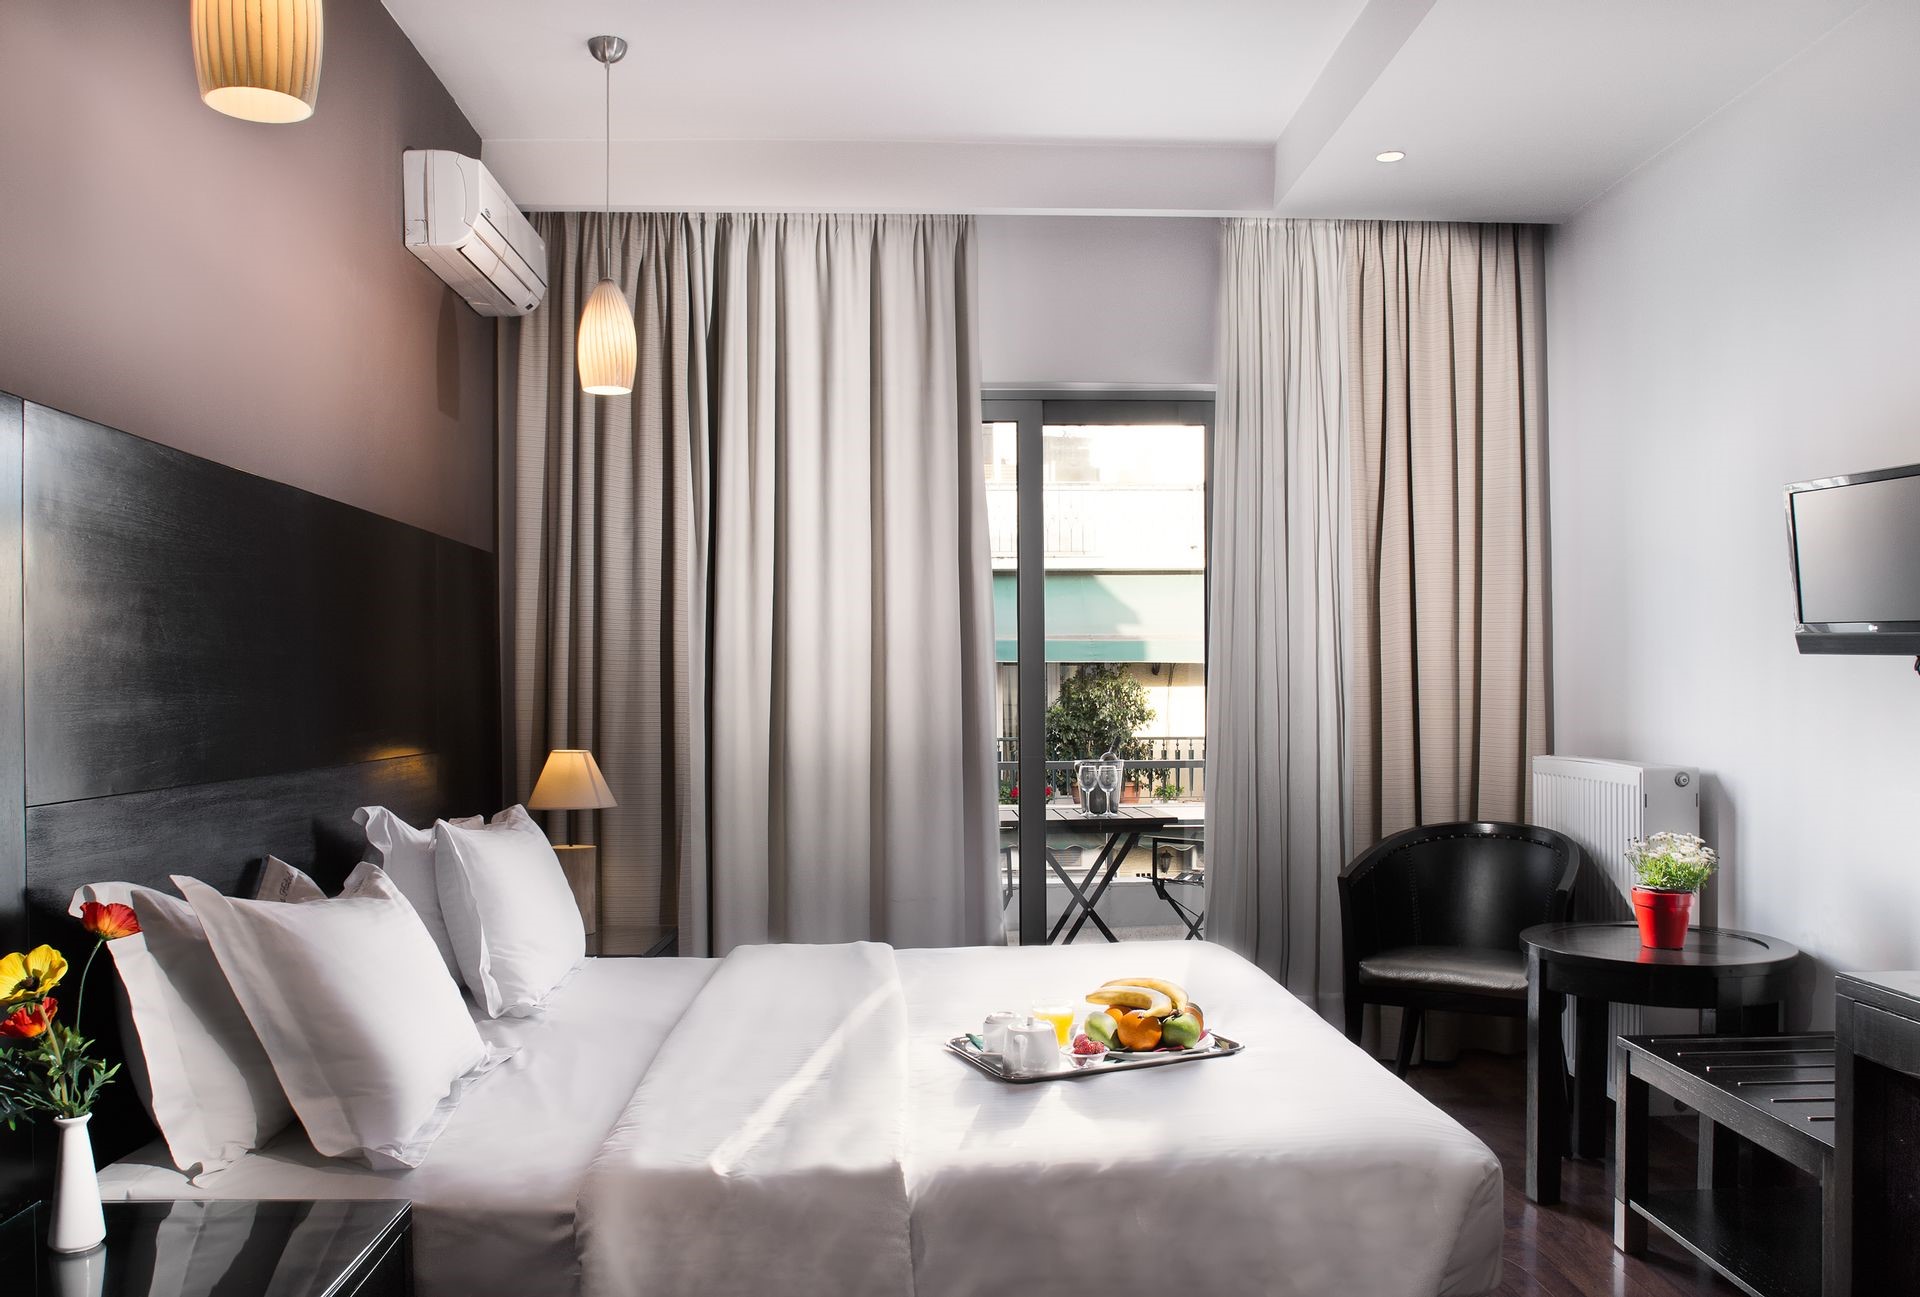 Areos Hotel Athens - Αθήνα ✦ 2 Ημέρες (1 Διανυκτέρευση) ✦ 2 άτομα ✦ 2 ✦ έως 30/09/2022 ✦ Free WiFi